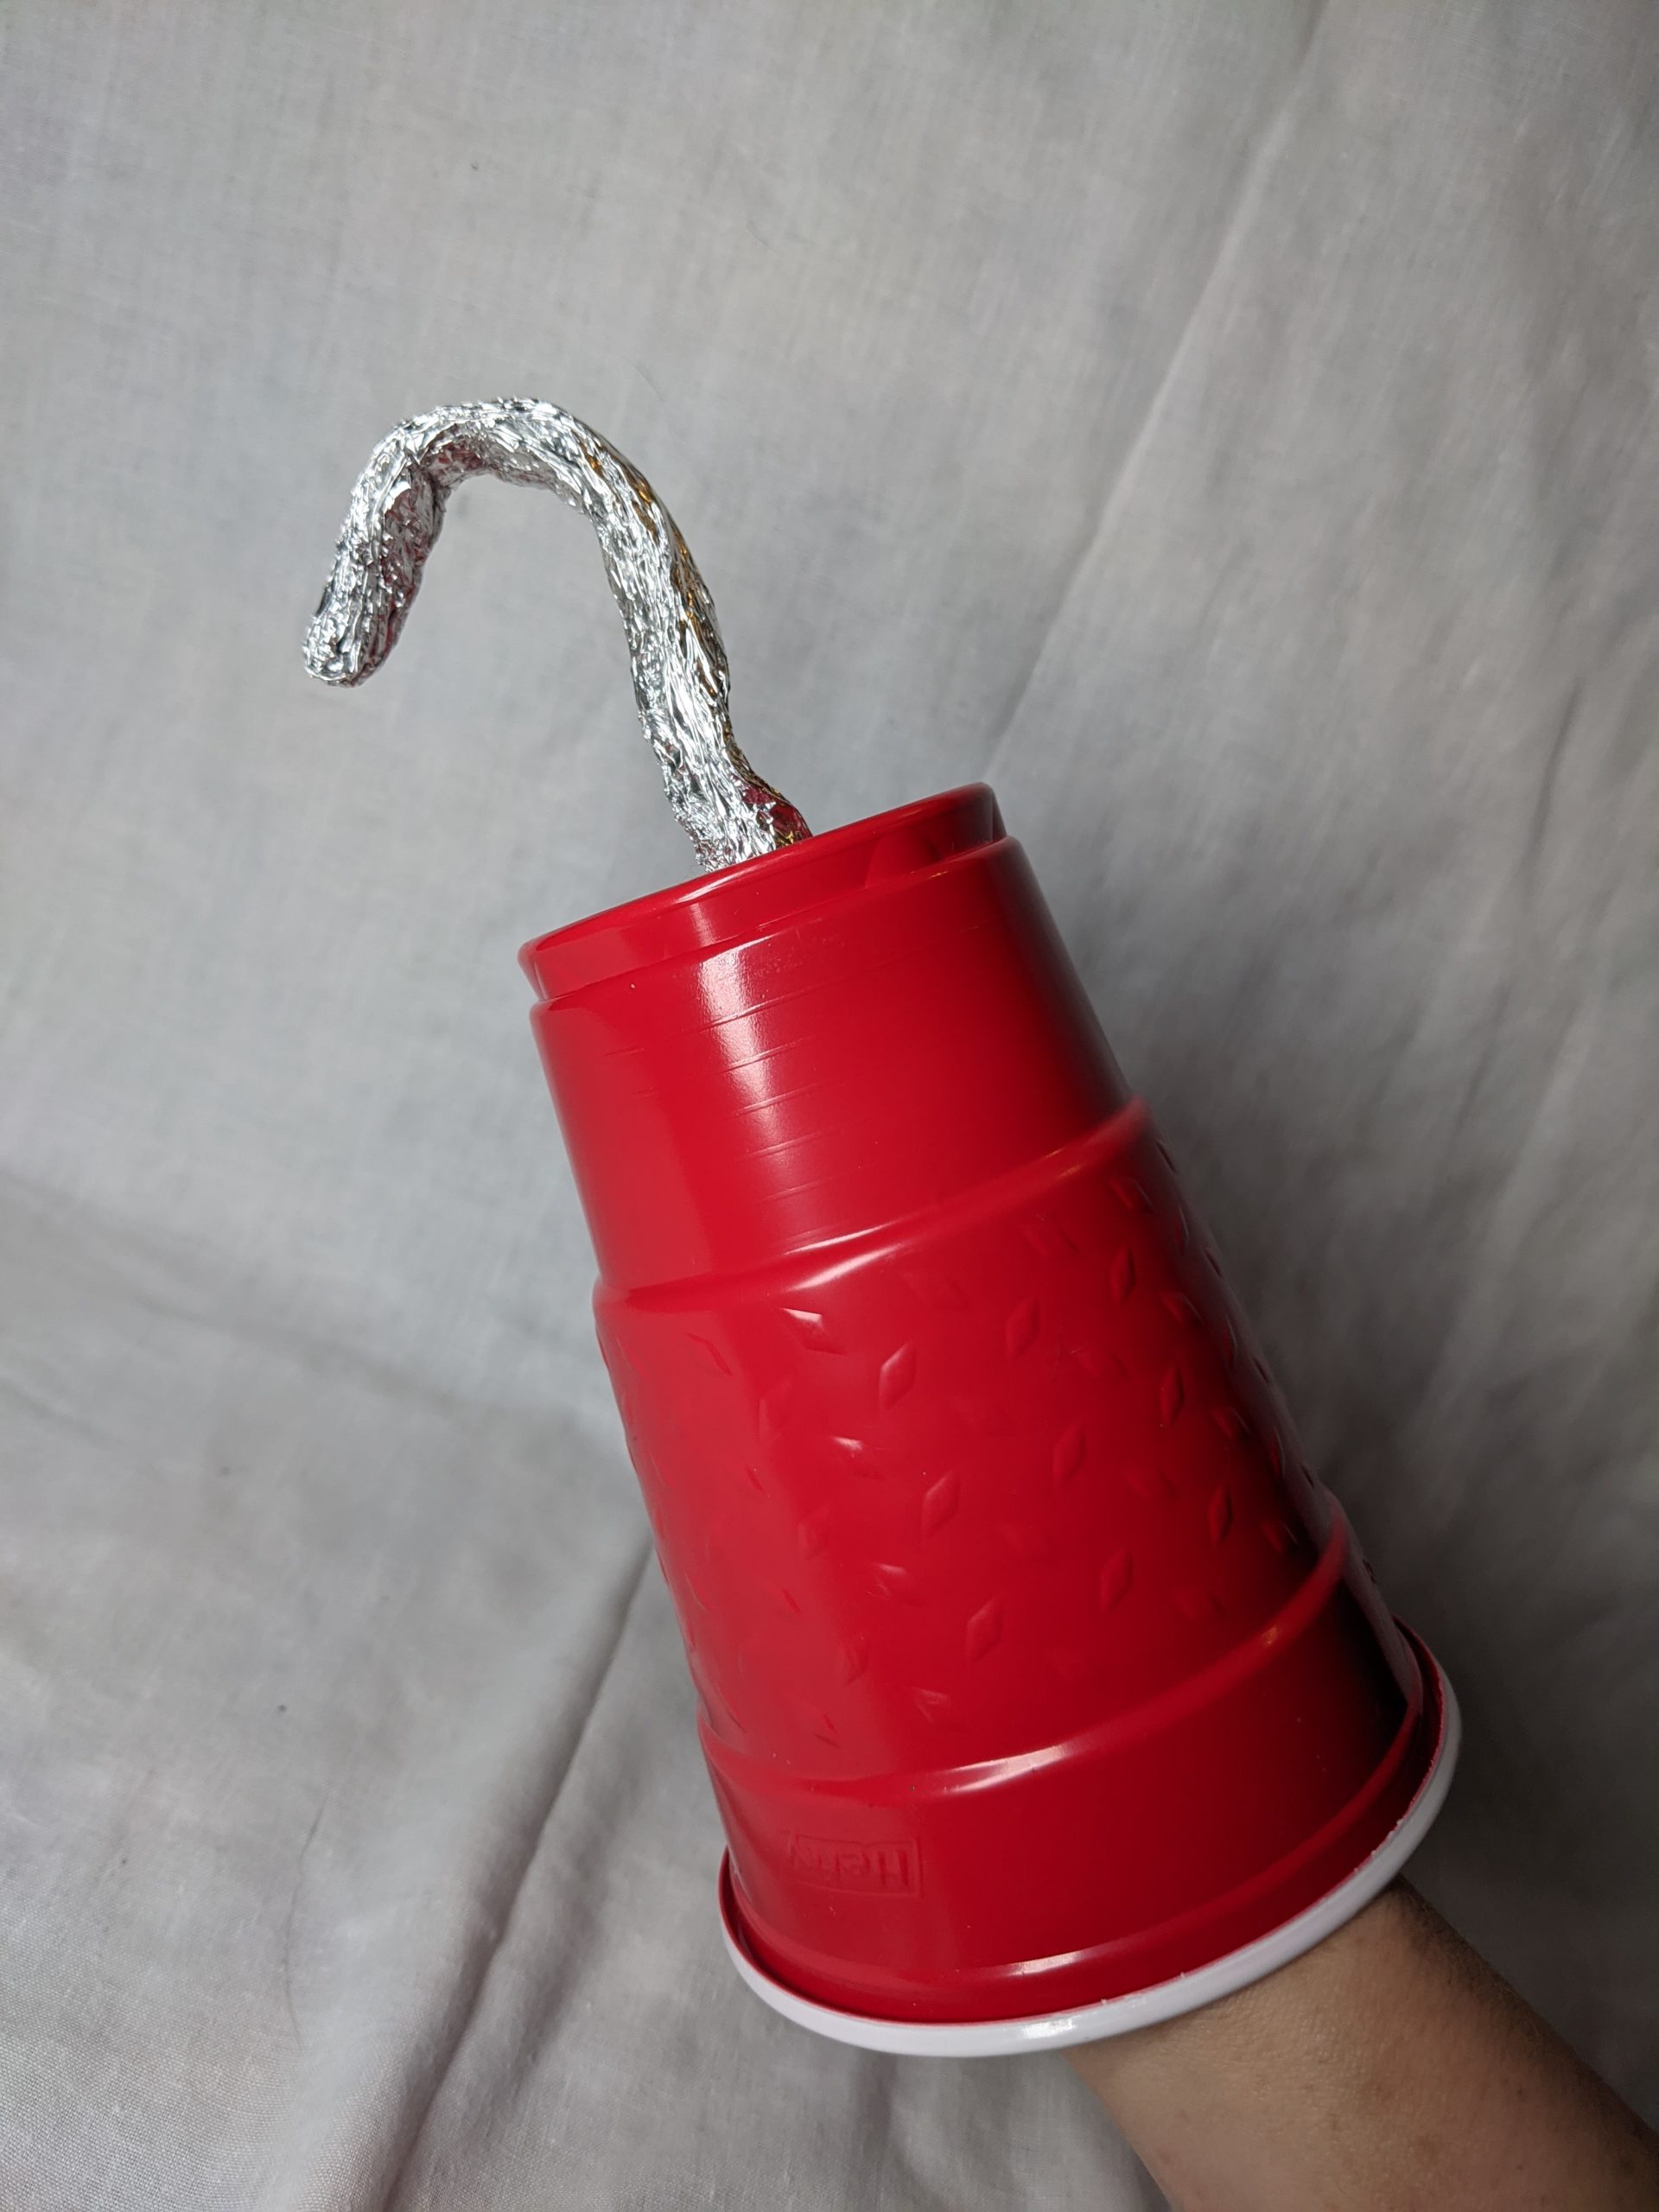 a pirate hook made from a cup and foil